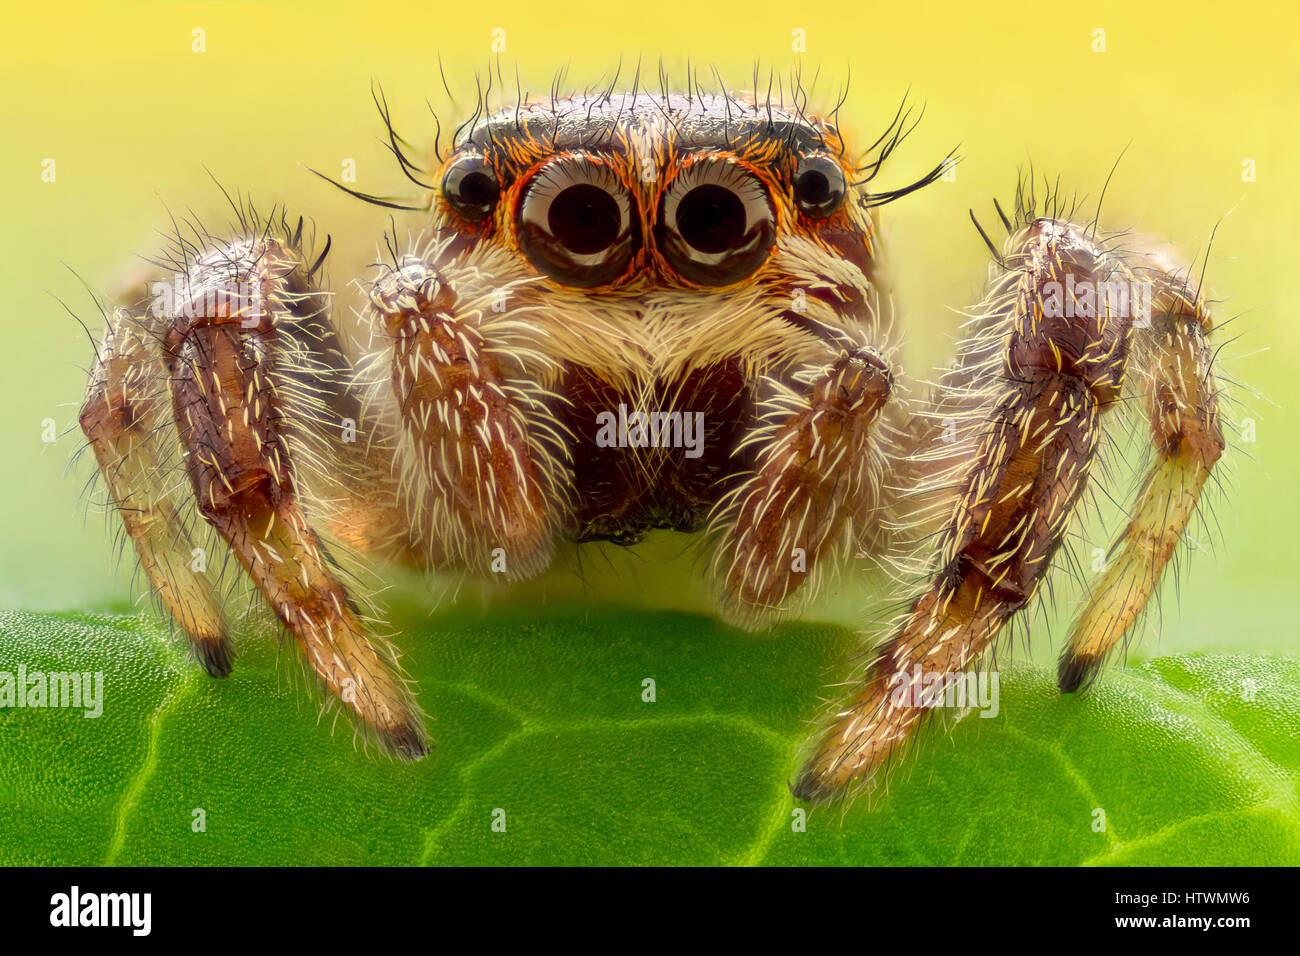 Extreme magnification - Jumping spider on a leaf Stock Photo